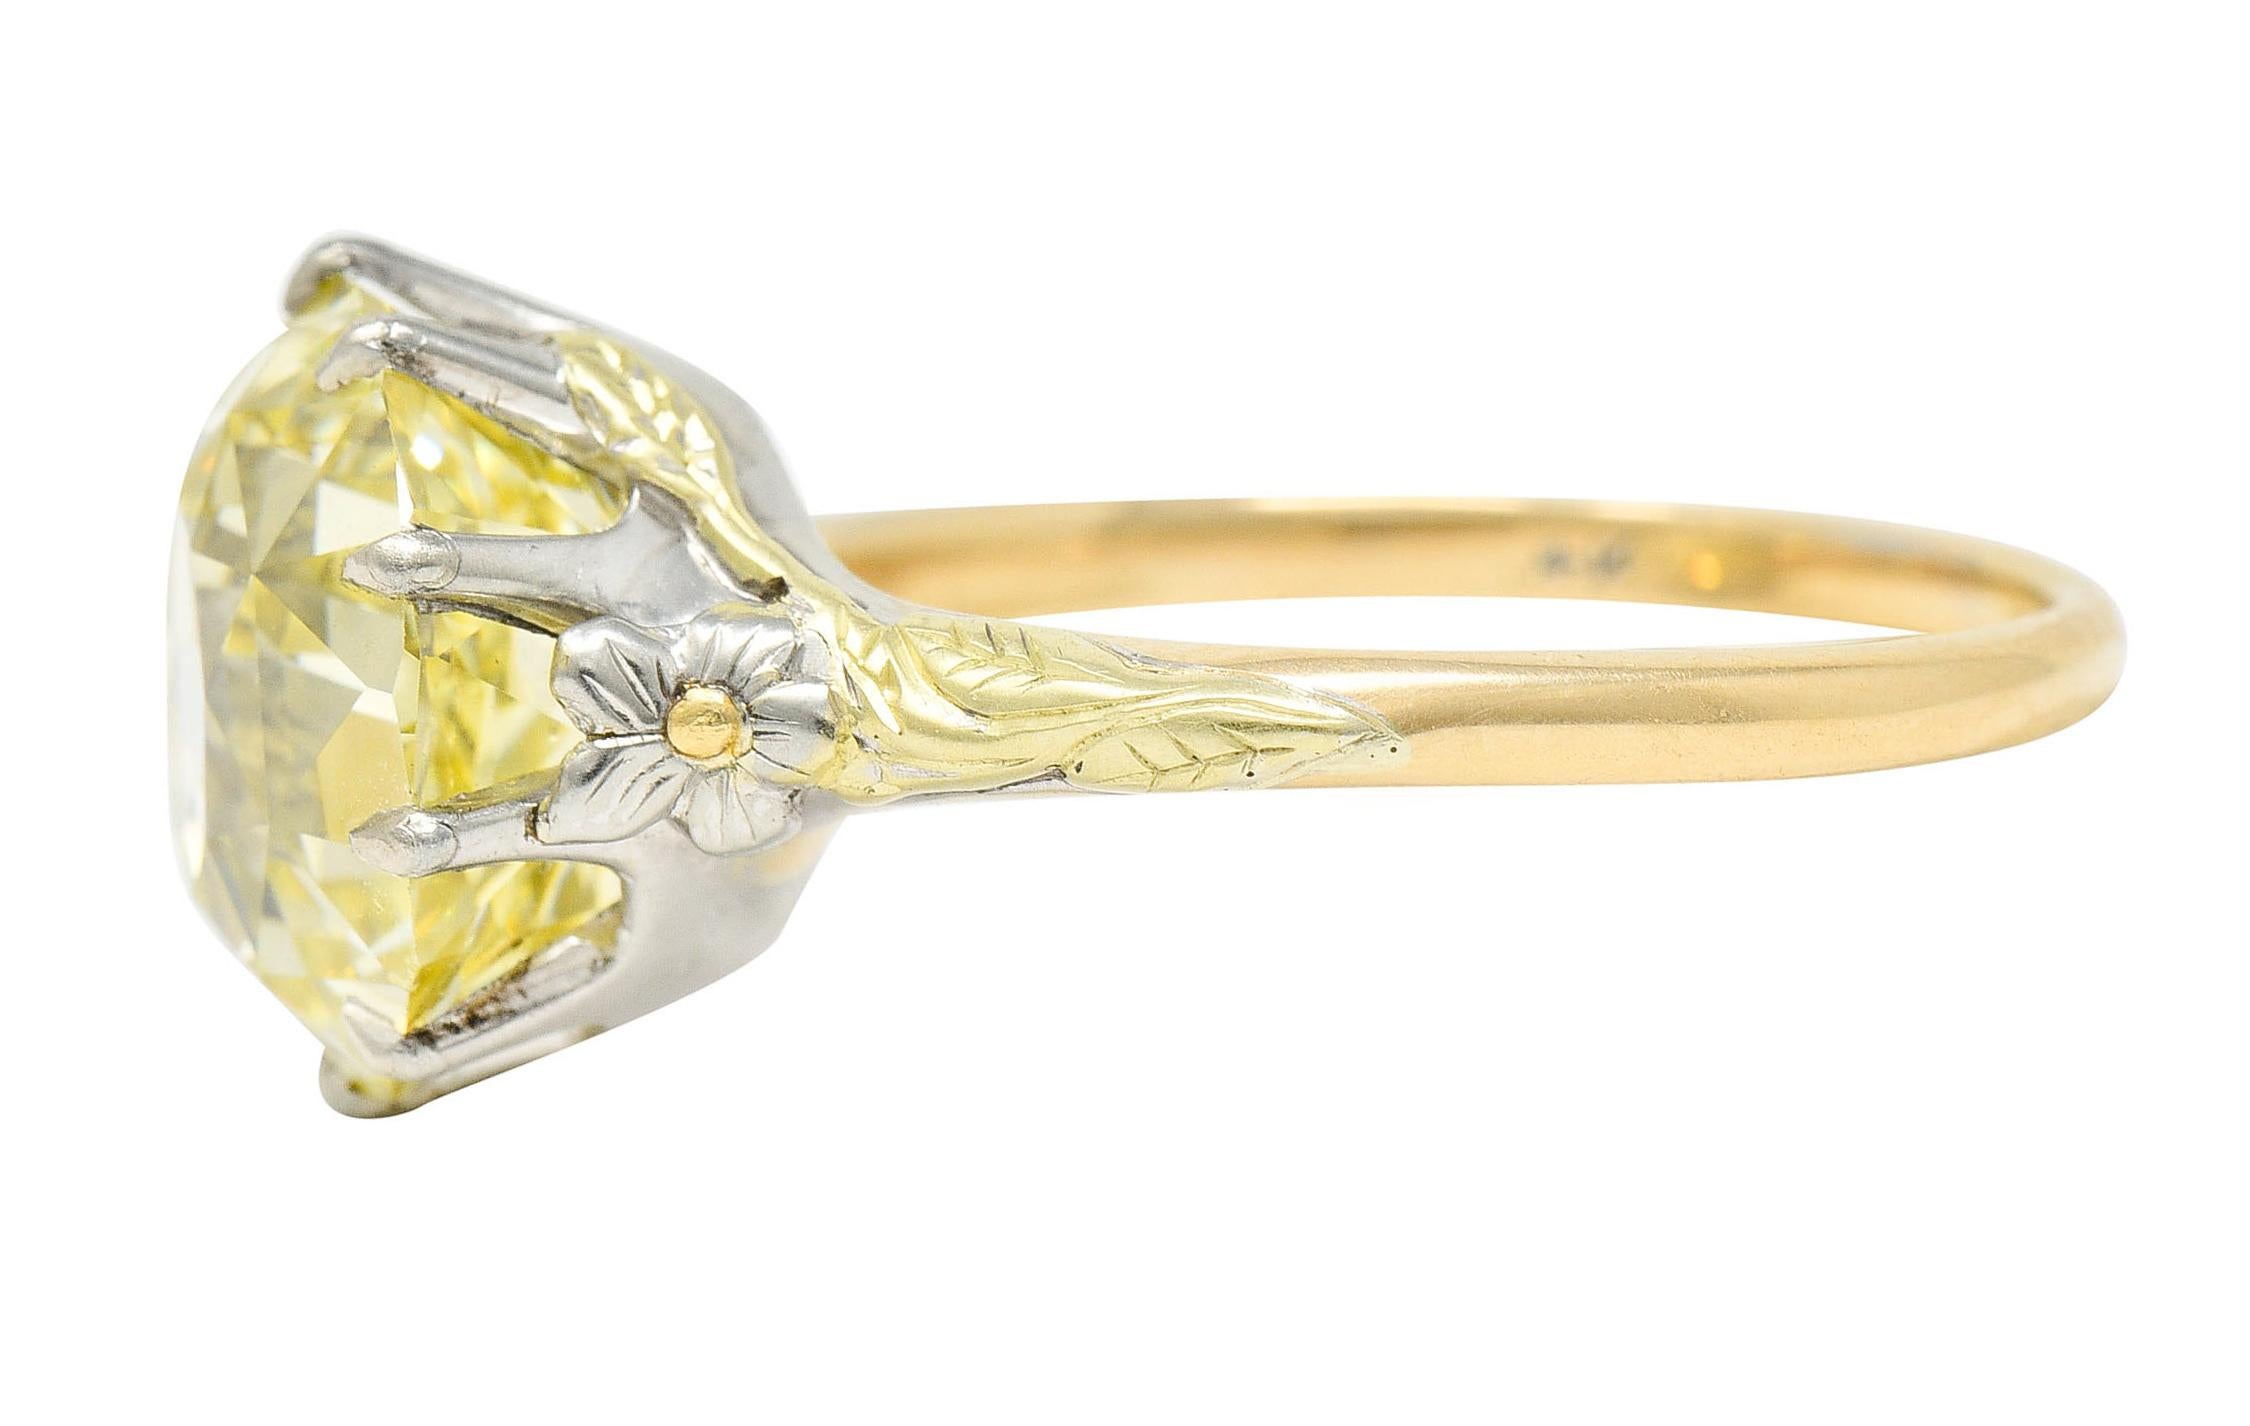 Arts and Crafts Arts & Crafts 7.12 Carats Fancy Yellow Diamond 14 Karat Tri-Colored Gold Ring